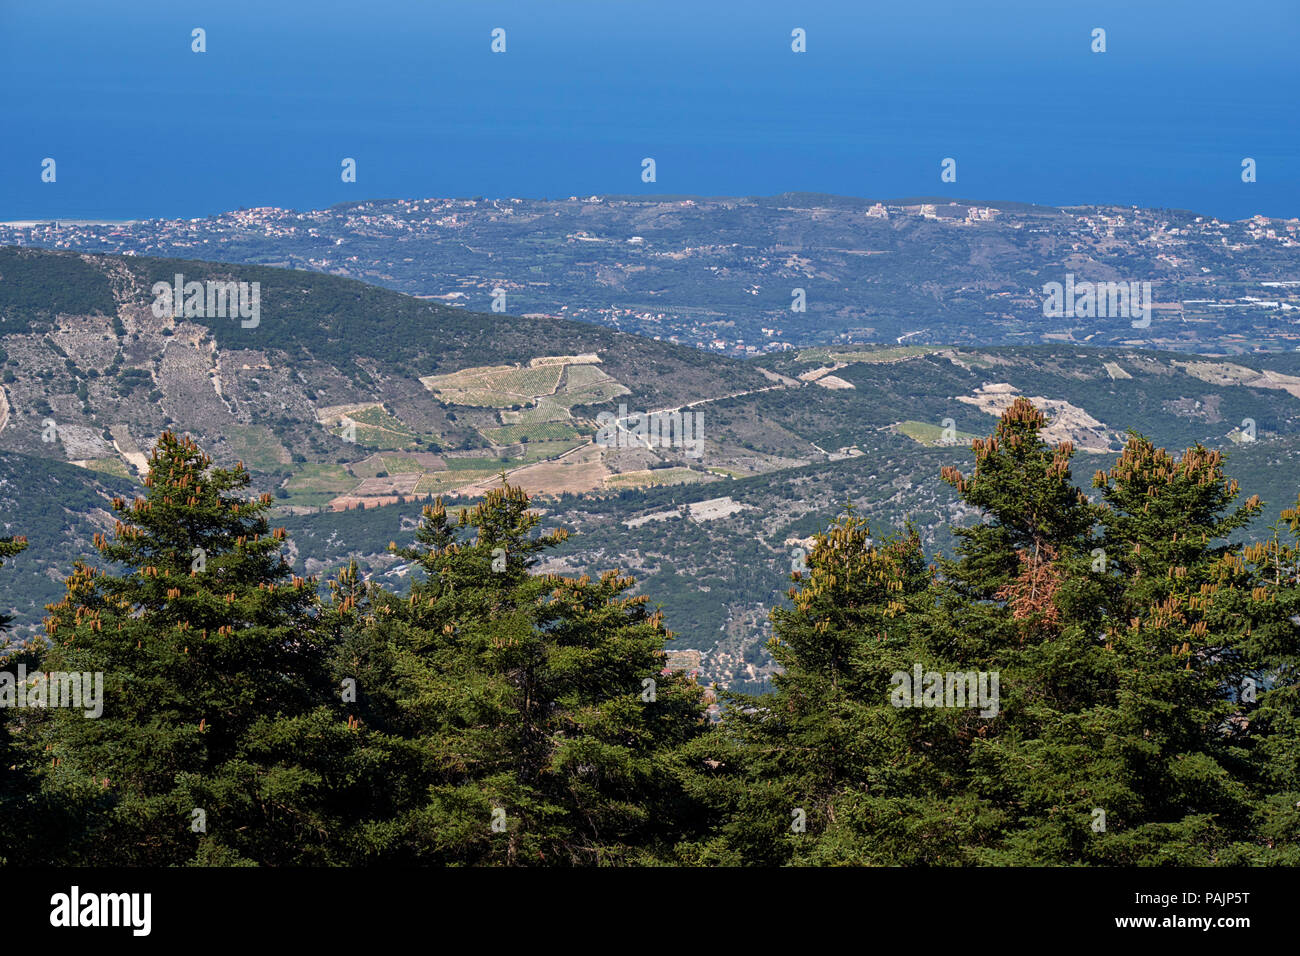 View from Mount Aenos National Park: Cephalonia Pine trees in foreground with vineyards of the Robola Wine Cooperative in the Omala Valley below. Ceph Stock Photo